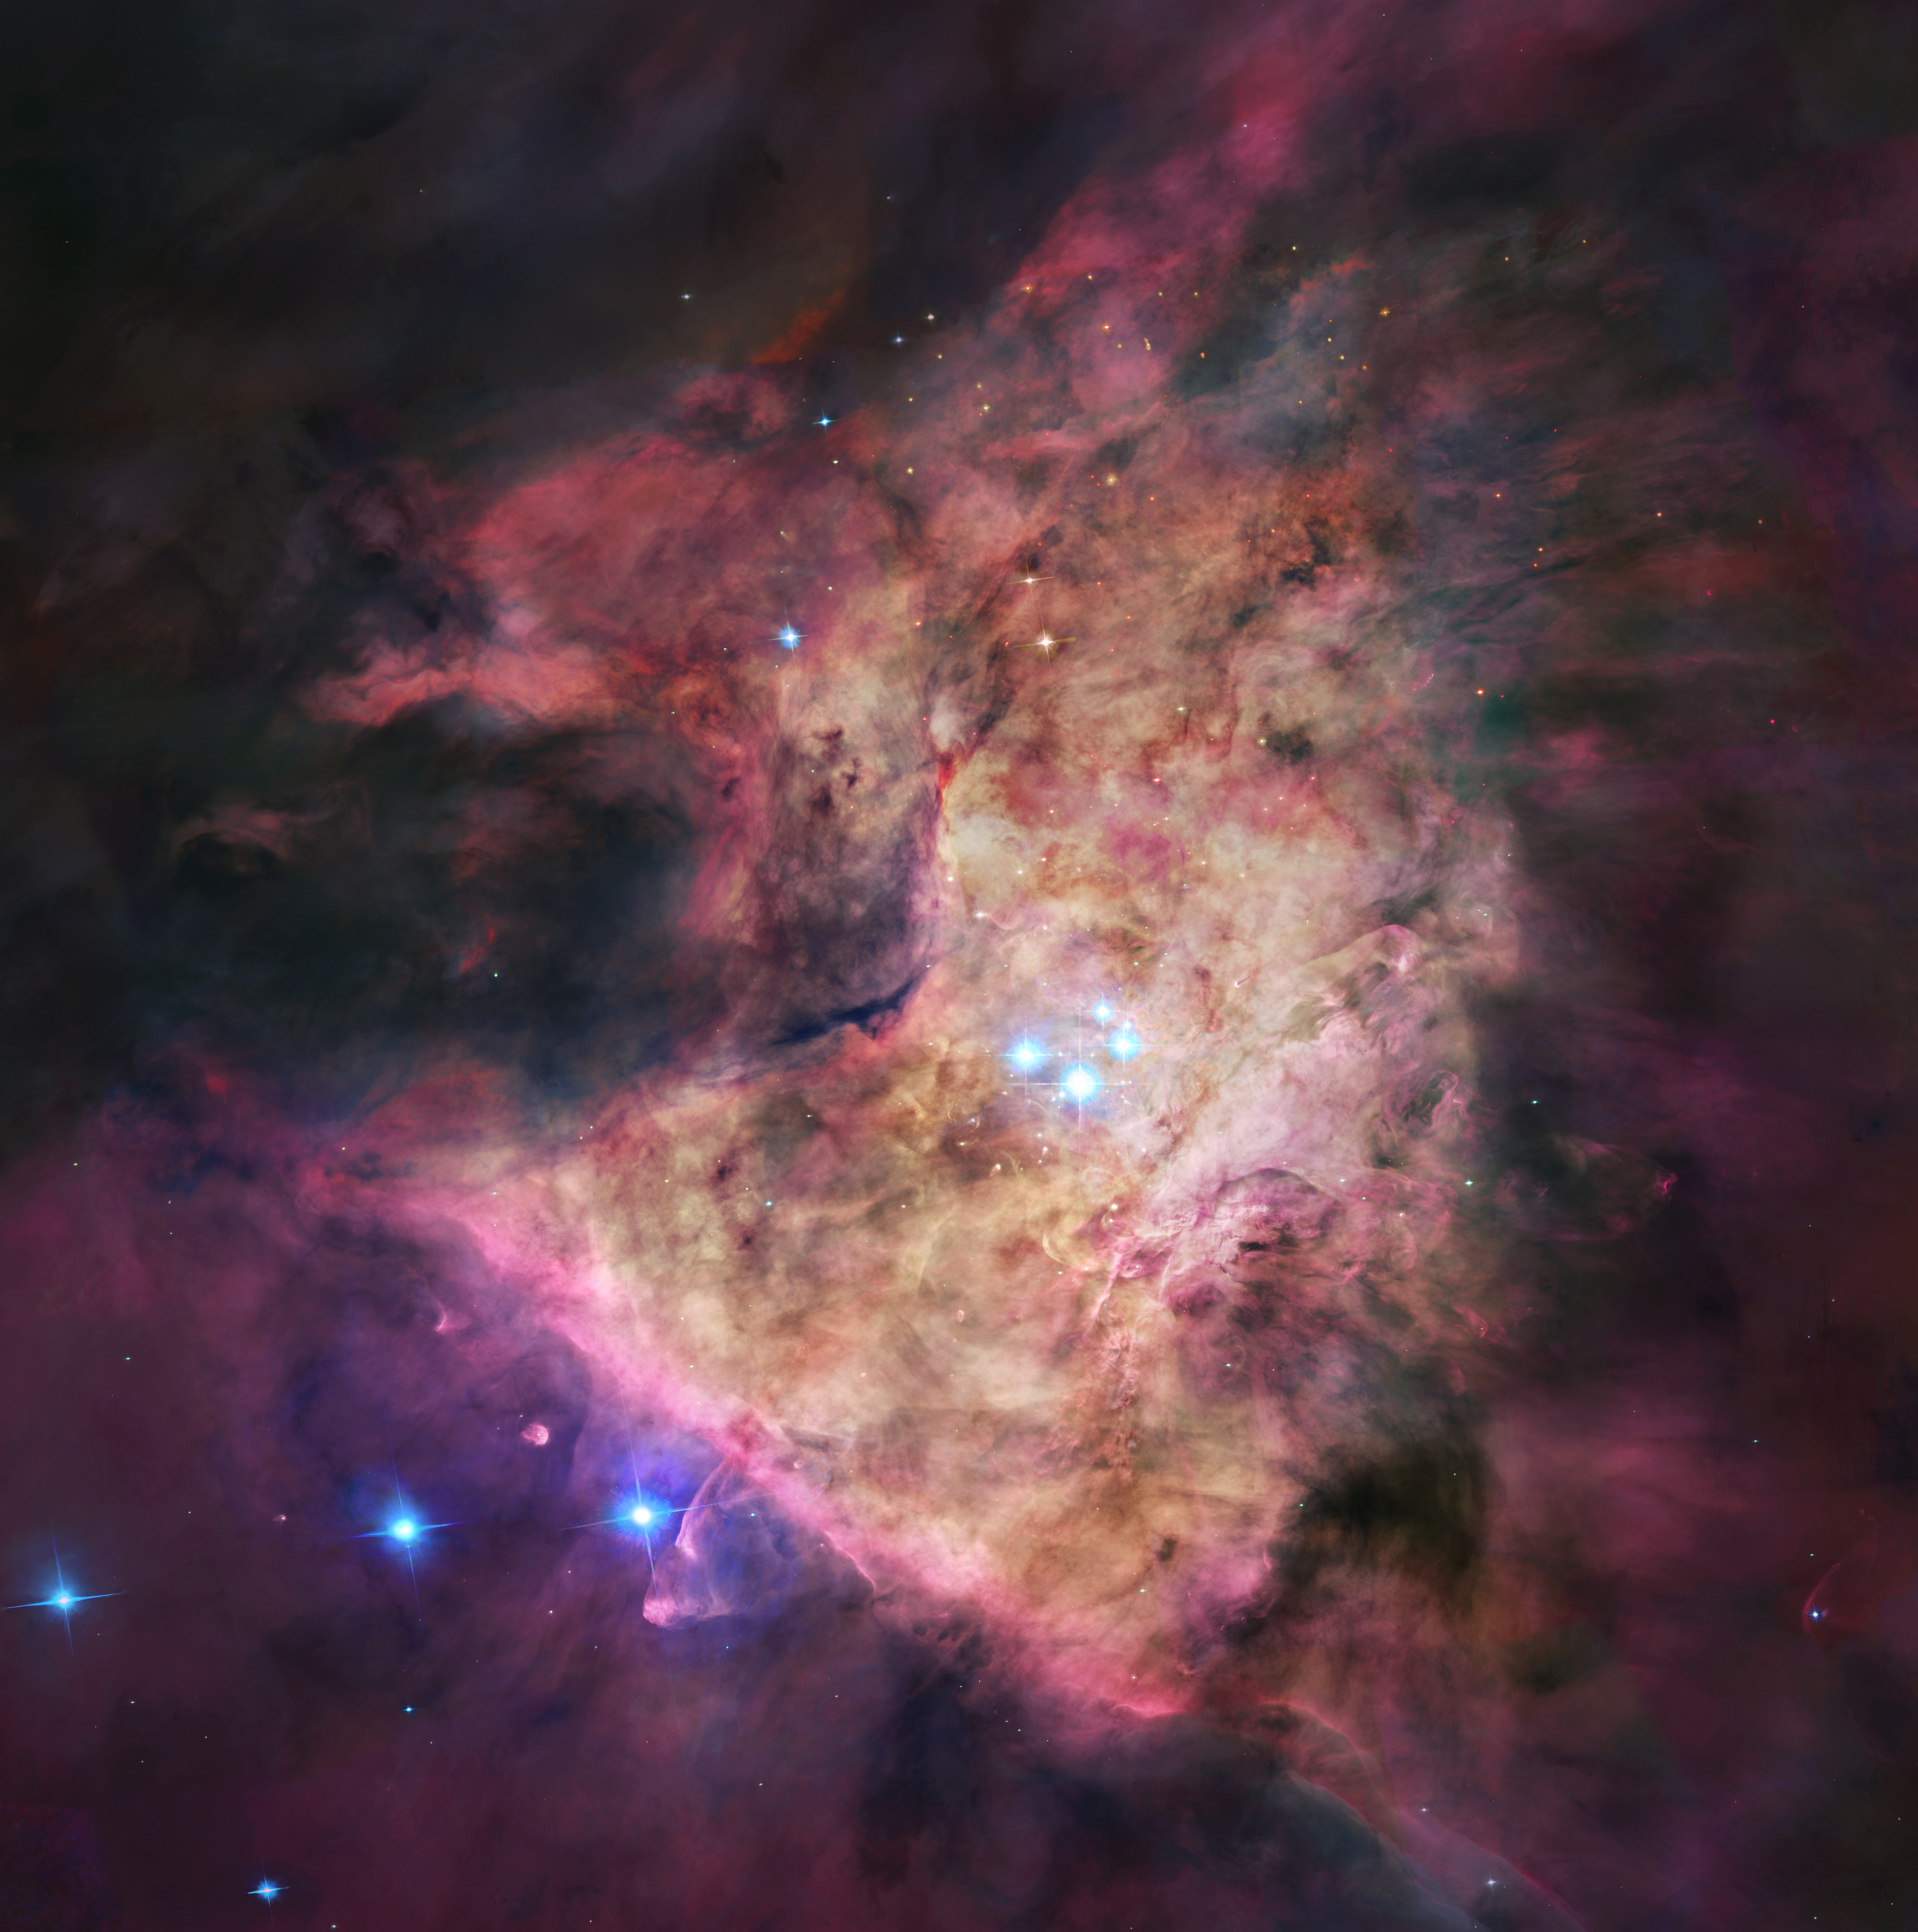 At the Heart of Orion